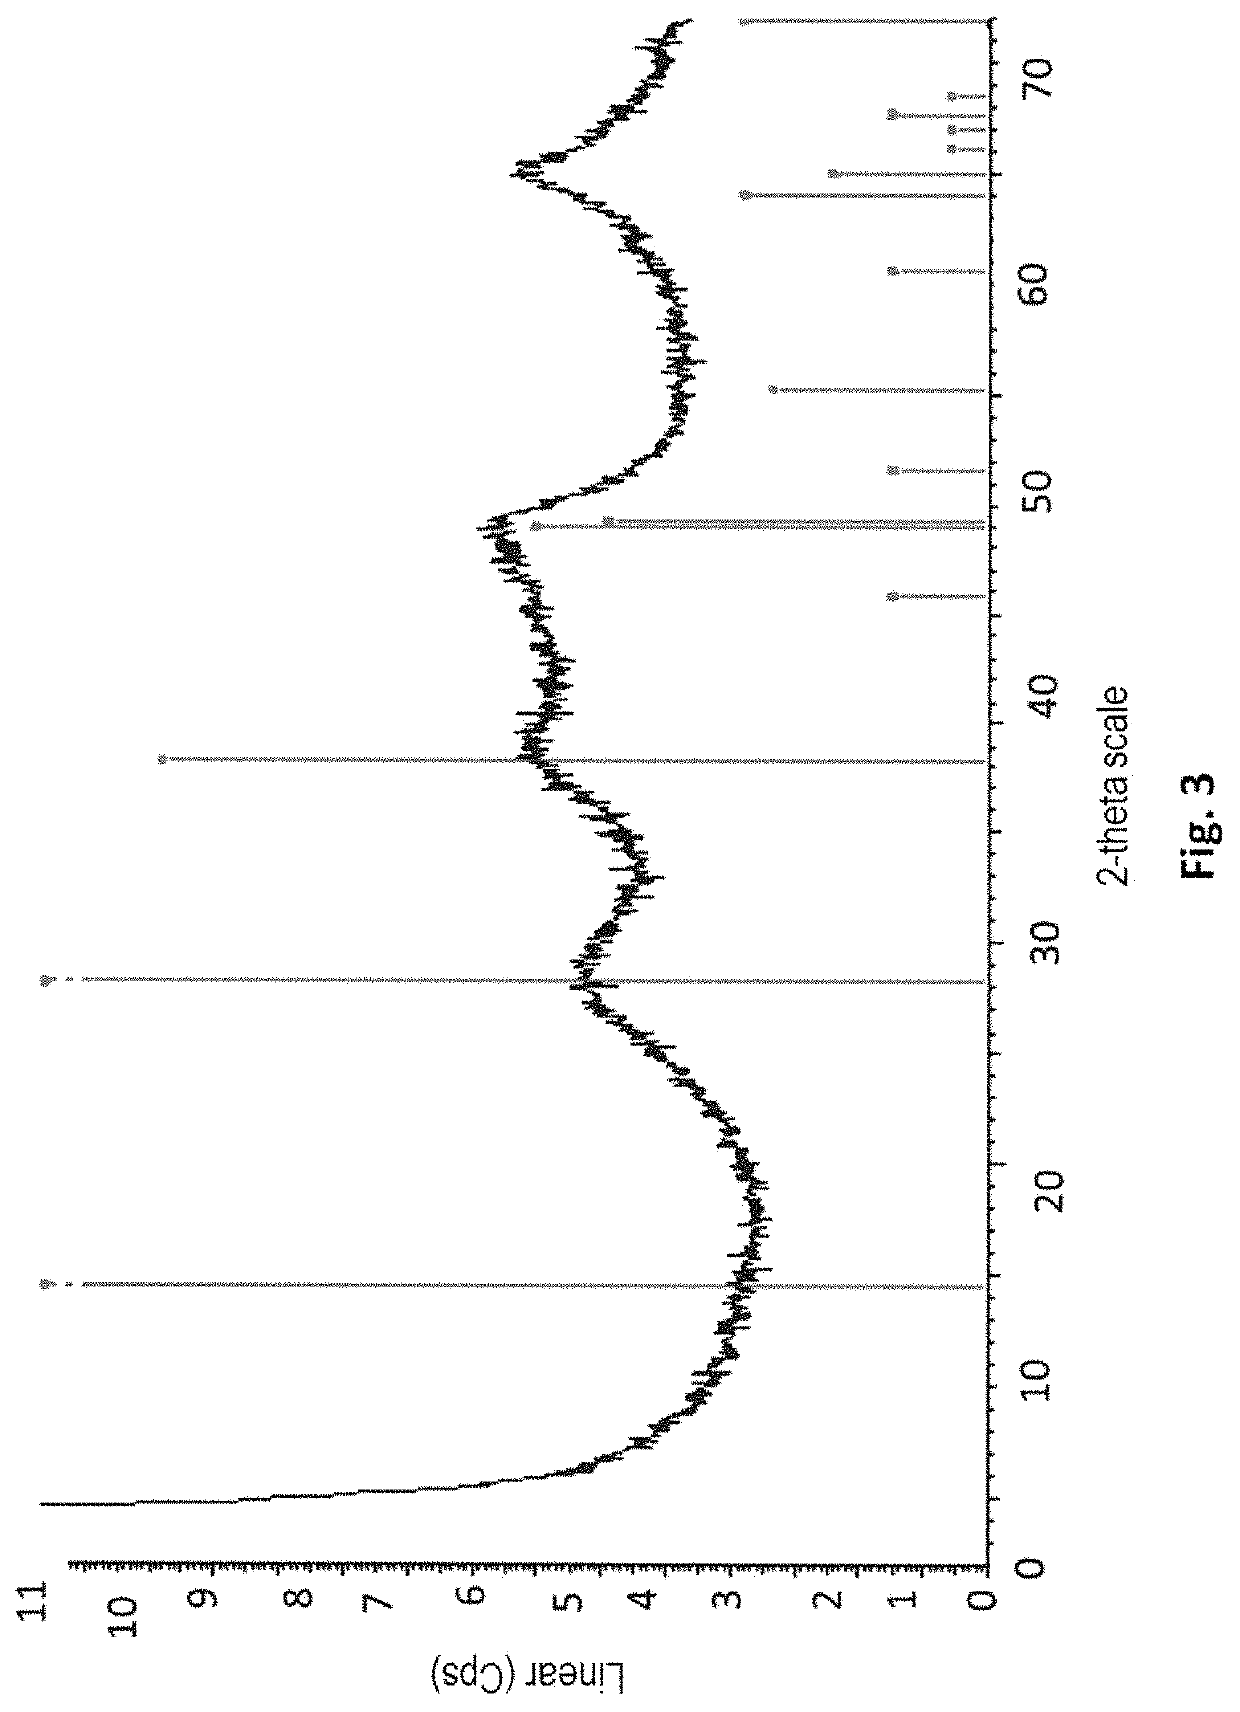 Process for preparing an adsorbing material comprising a precipitating step of boehmite according to specific conditions and process for extracting lithium from saline solutions using this material